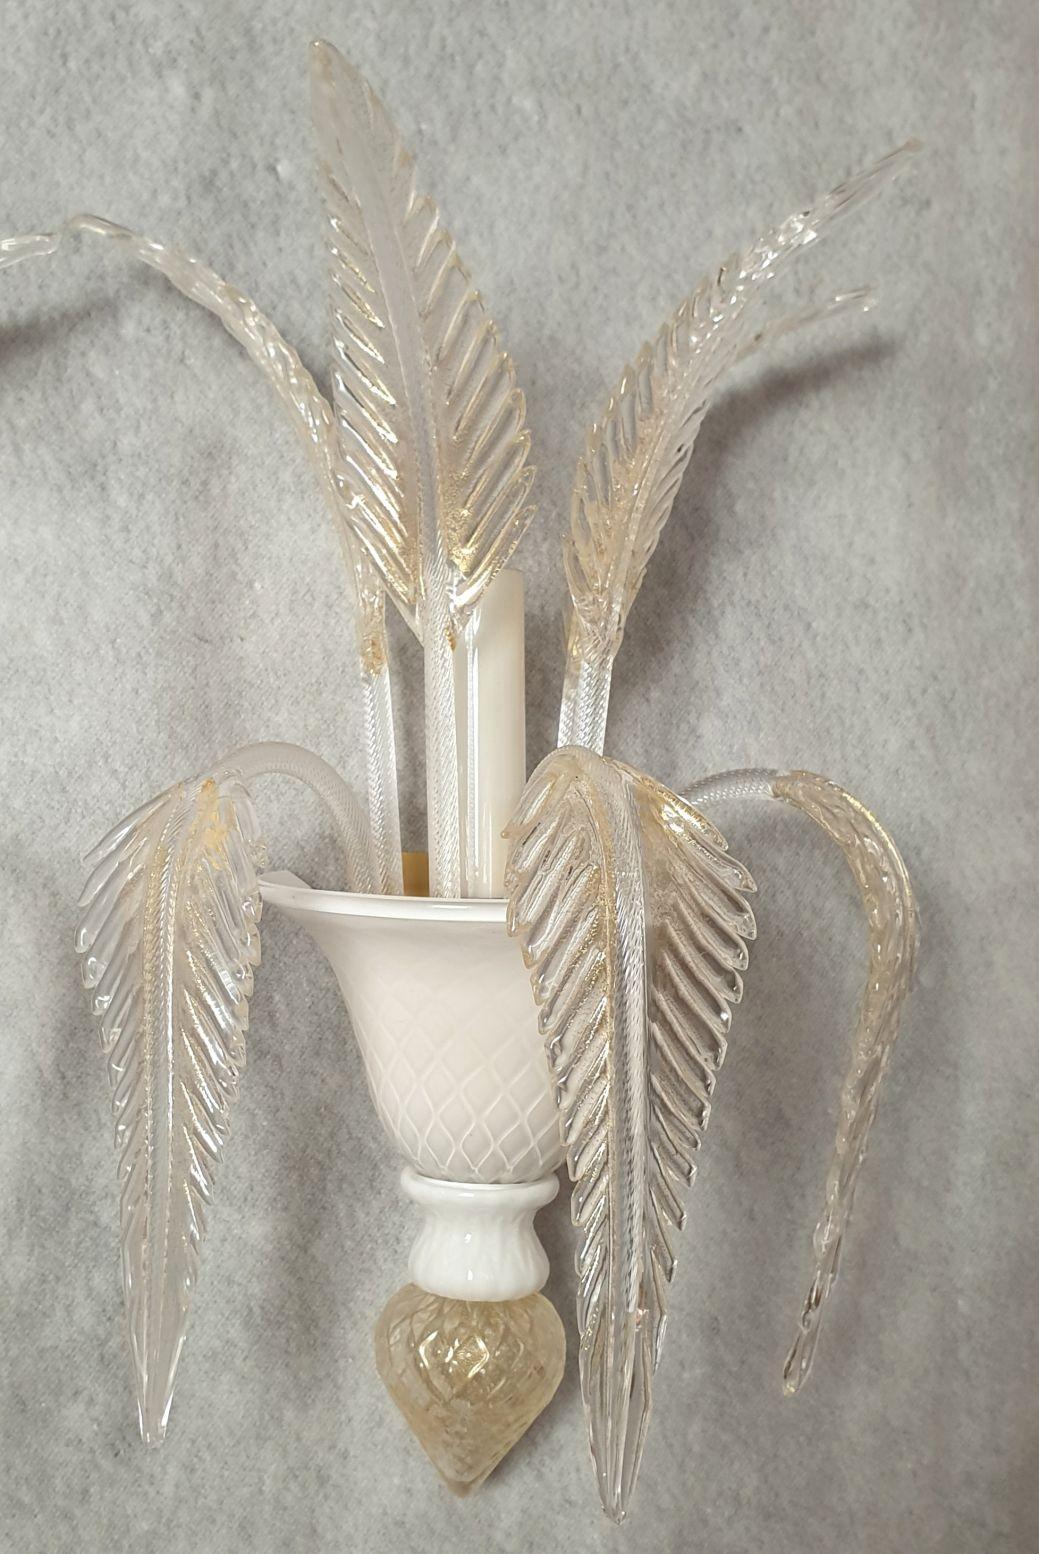 White-gold Murano glass sconces - a pair In Excellent Condition For Sale In Dallas, TX